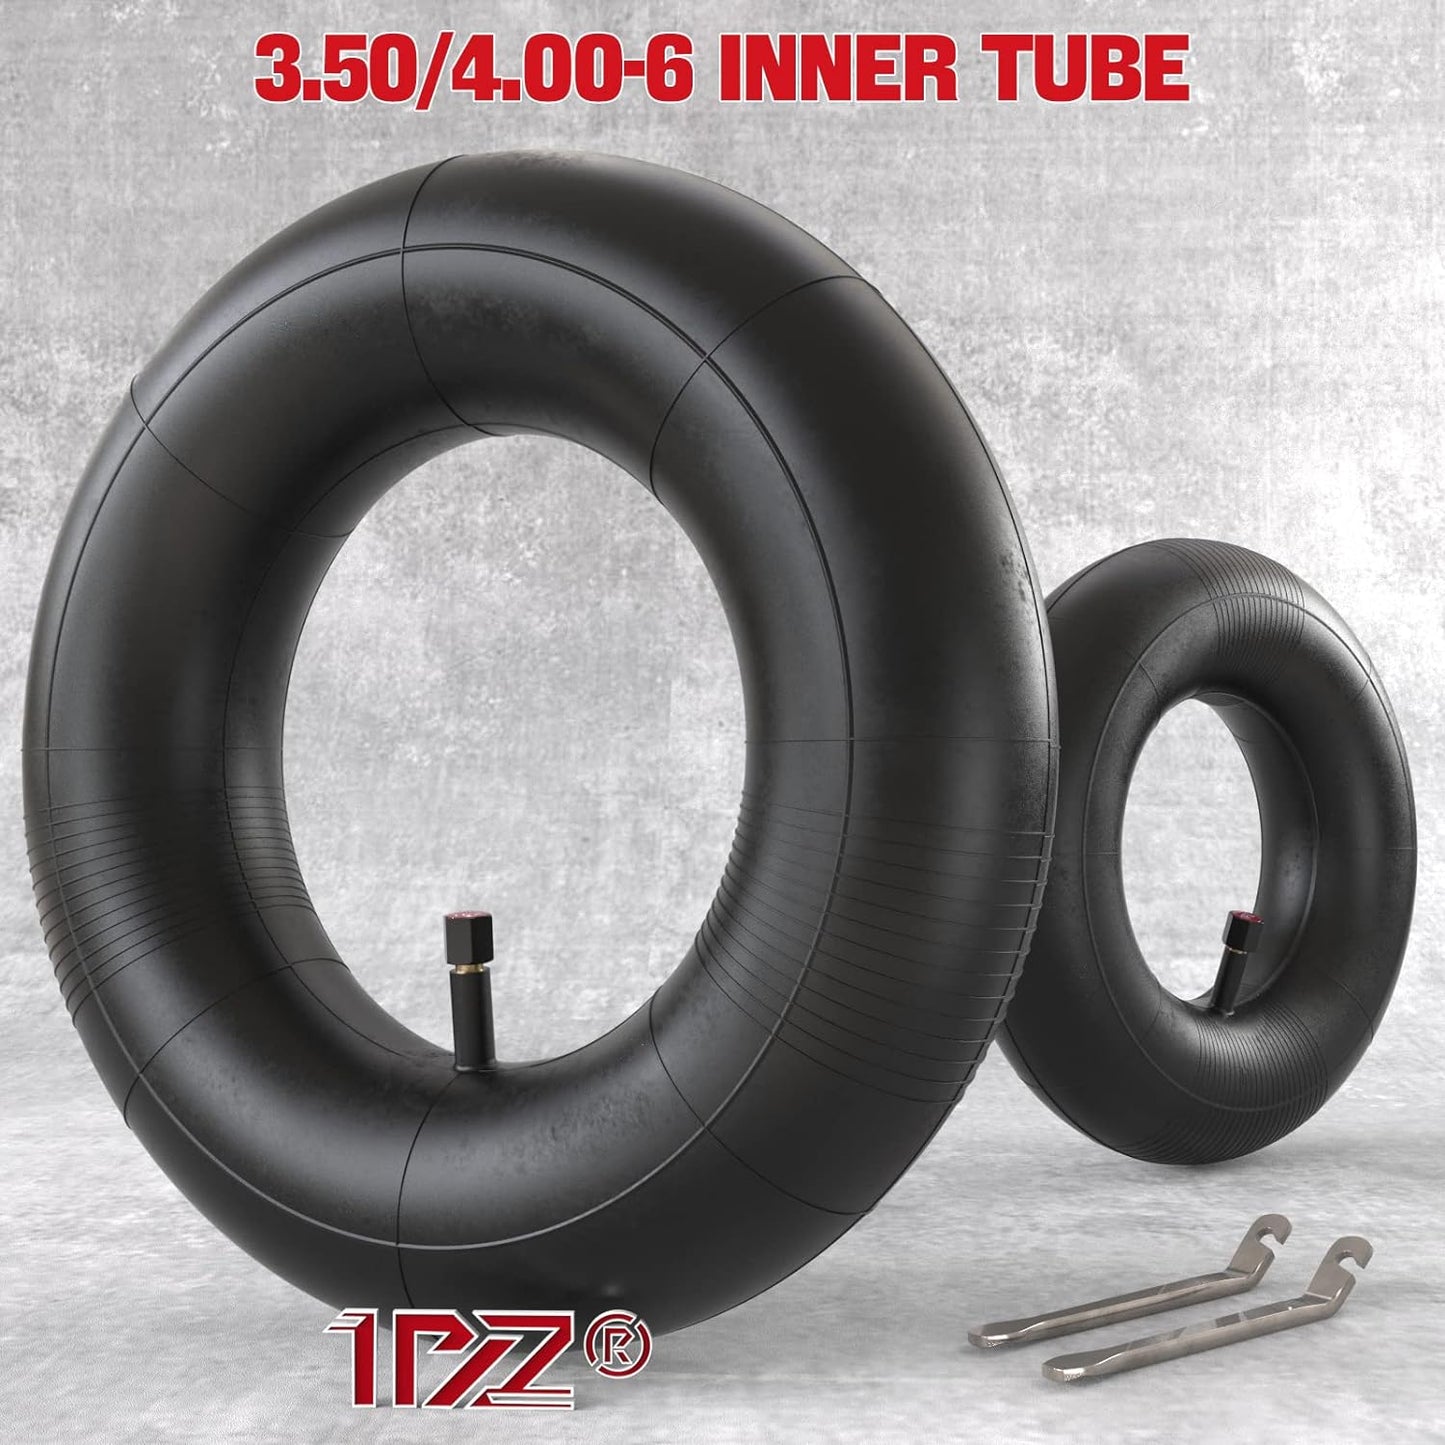 1PZ 3RI-5GN 3.50/4.00-6 Inner Tube with Straight Valve Stem Replacement for 3.50-6 4.00-6 Wheelbarrow Cart Lawn Mower Tractors Garden Cart Wagons Wheel